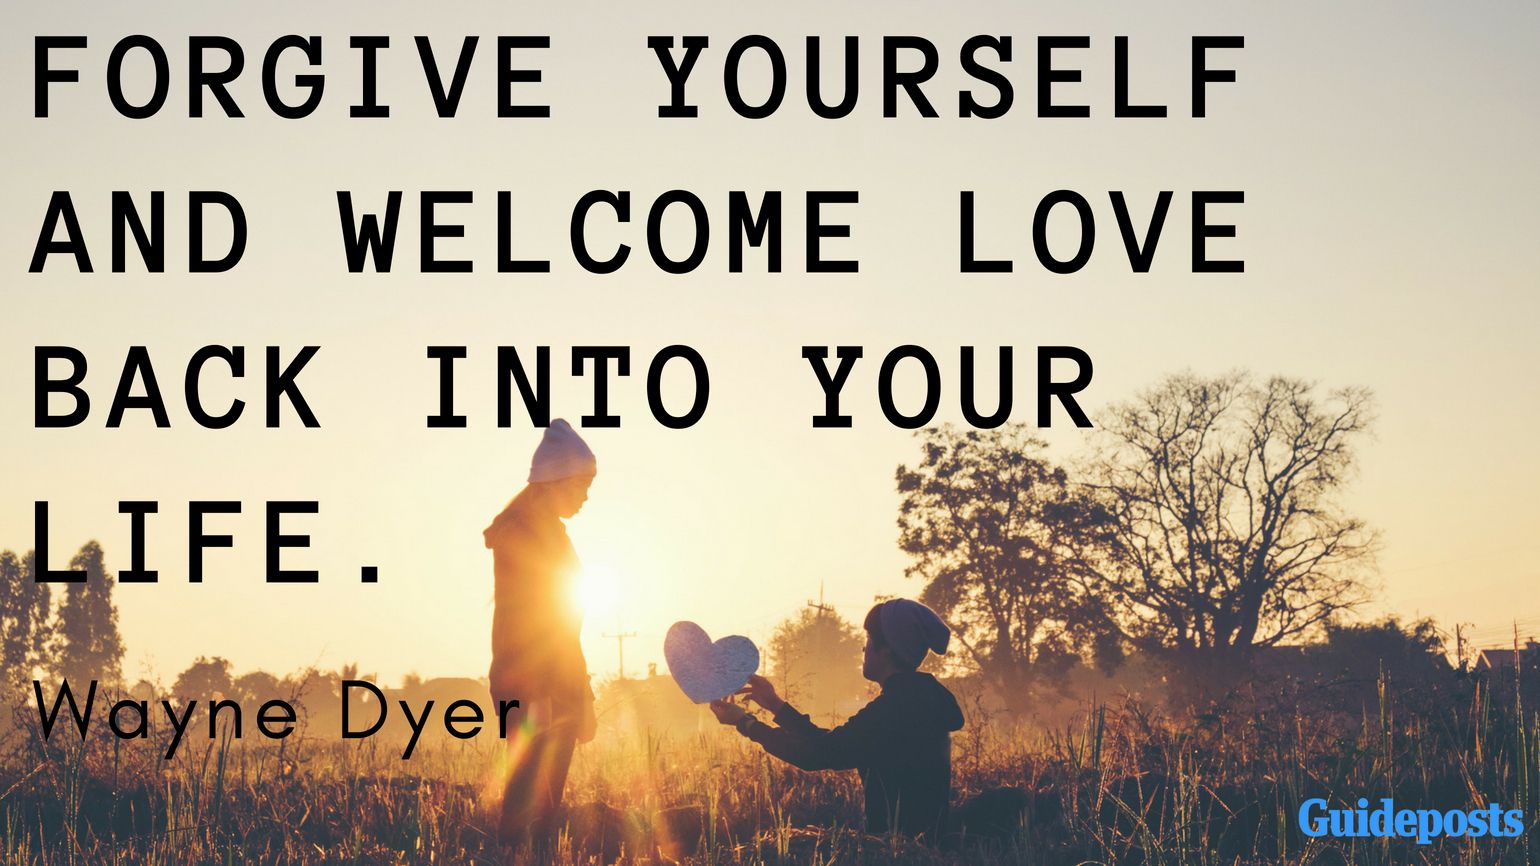 Forgive yourself and welcome love back into your life. ― Wayne Dyer